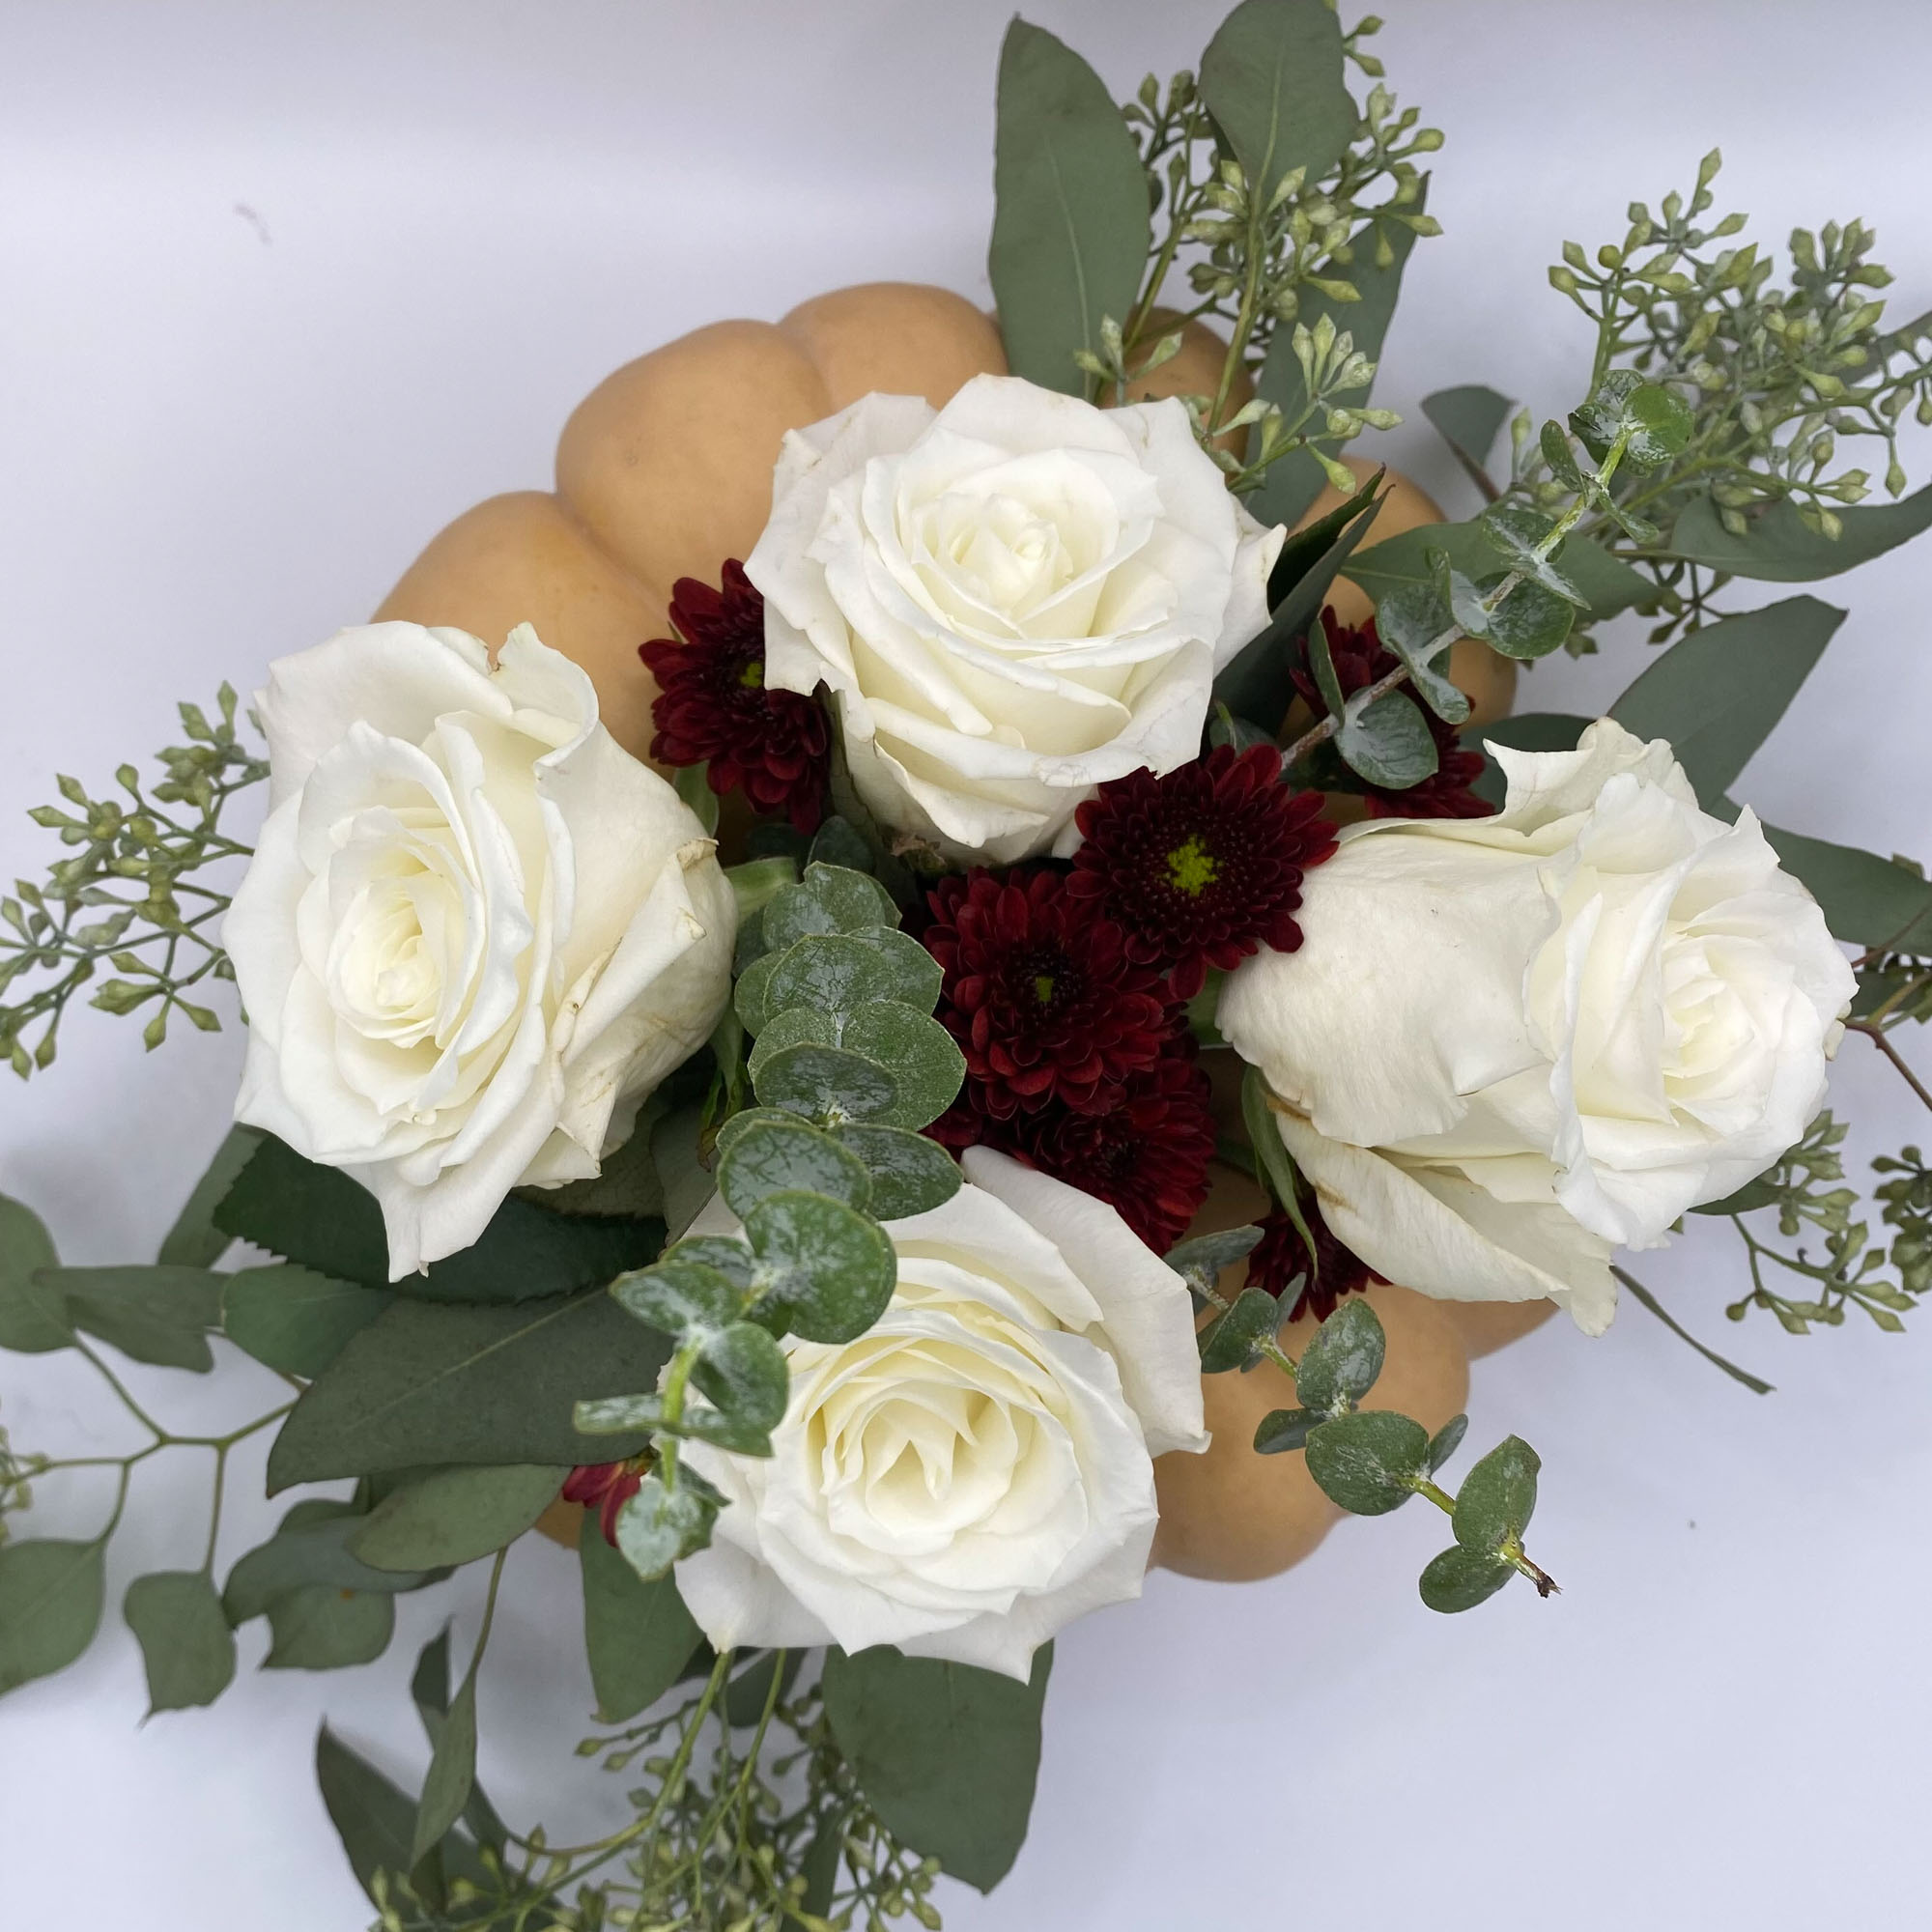 Overhead shot of a floral arrangement in a tan pumpkin, with white roses and burgundy flowers.